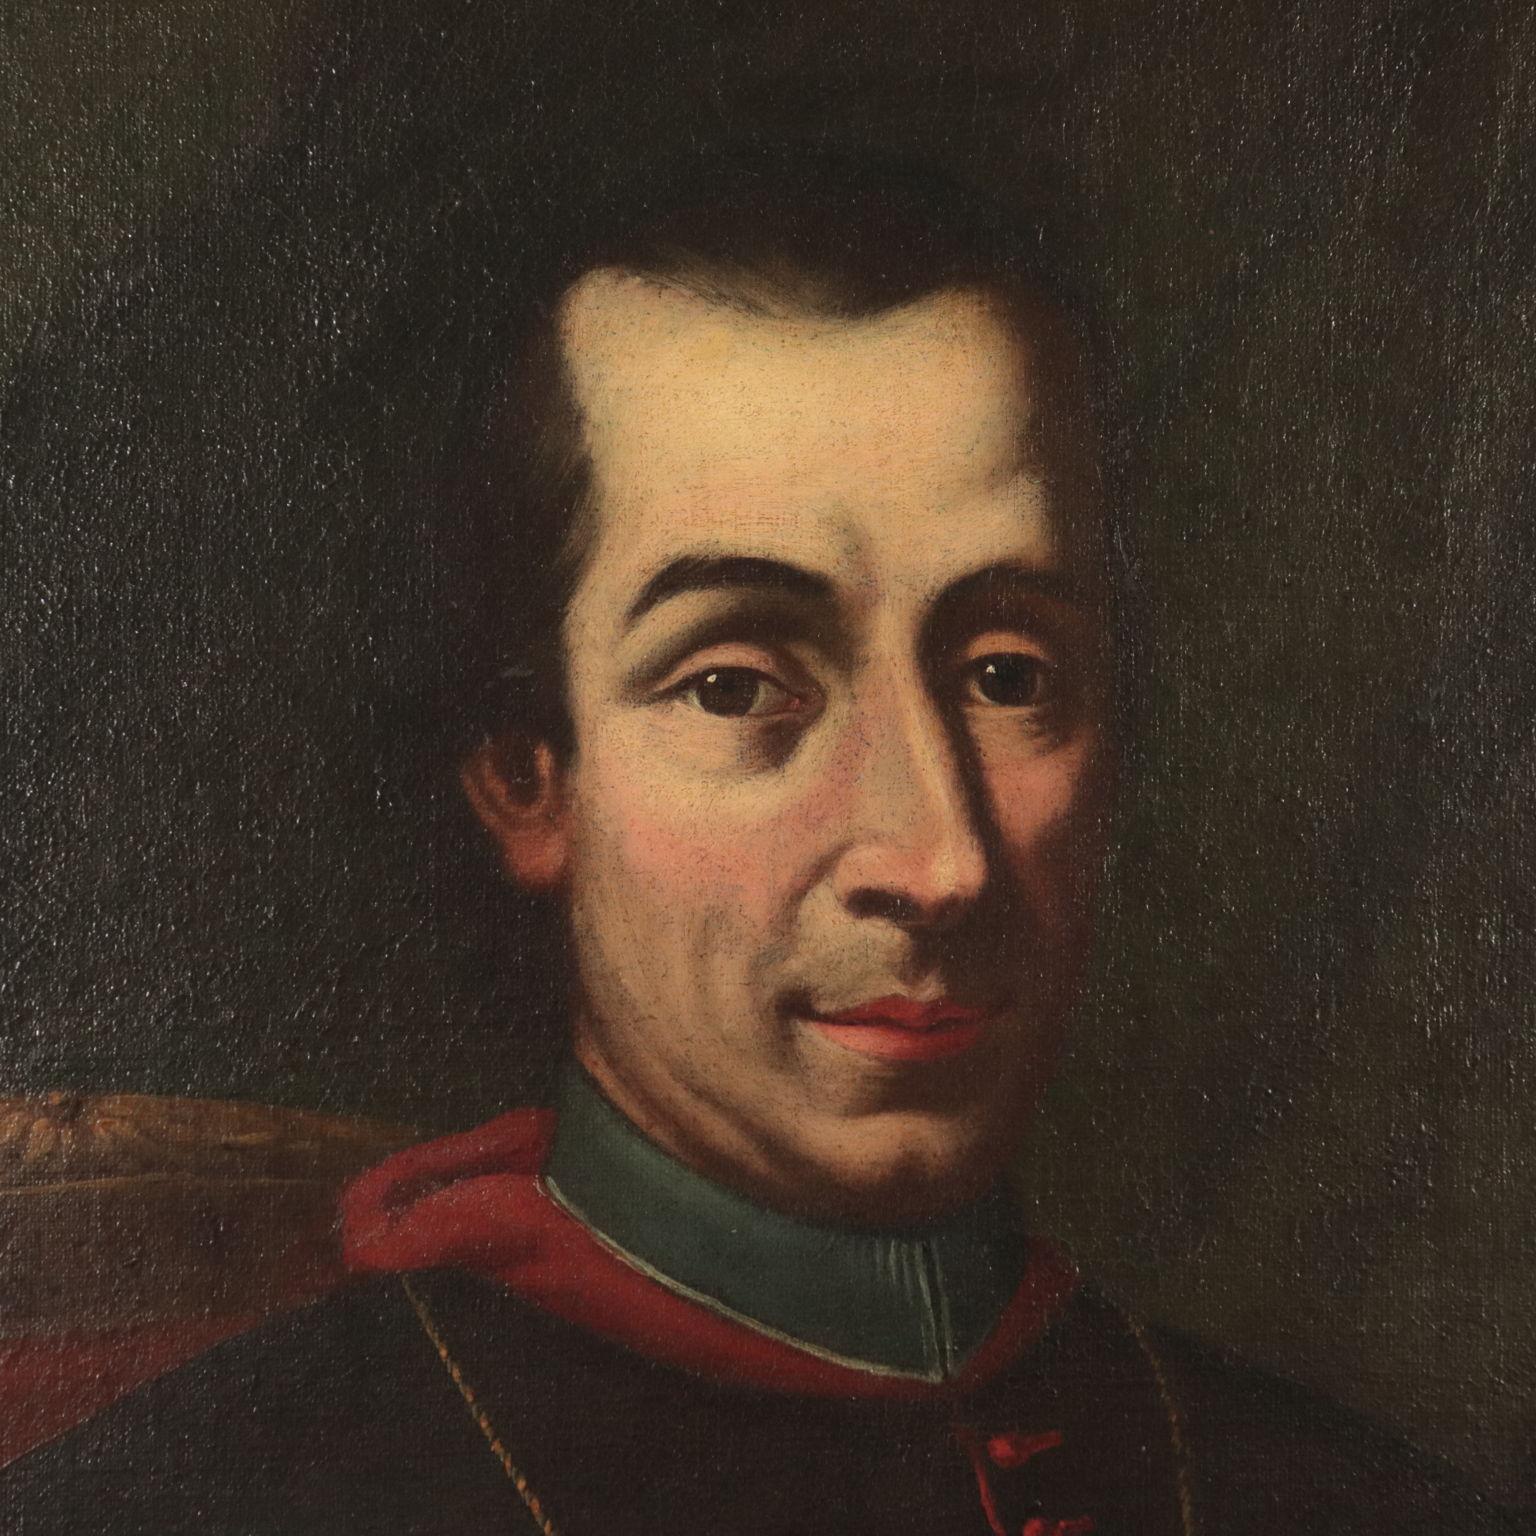 Portrait of a Prelate, Oil on Canvas, 18th Century - Black Portrait Painting by Unknown